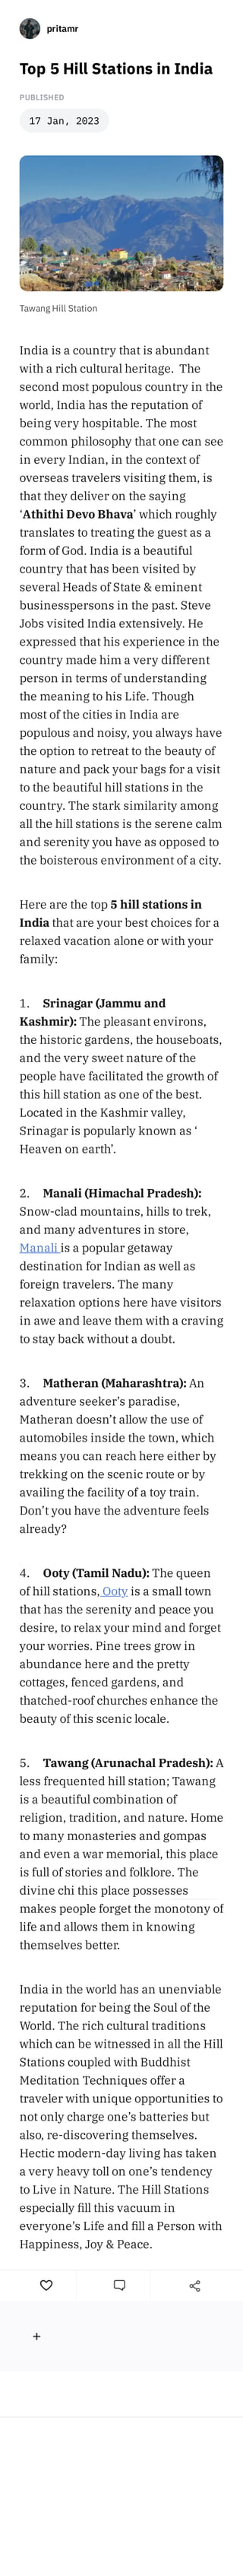 Top 5 Hill Stations in India
Write a comment ... Post
Created on stck.me
PUBLISHED
17 Jan, 2023
Tawang Hill Station
India is a country that is abundant
with a rich cultural heritage. The
second most populous country in the
world, India has the reputation of
being very hospitable. The most
common philosophy that one can see
in every Indian, in the context of
overseas travelers visiting them, is
that they deliver on the saying
‘Athithi Devo Bhava’ which roughly
translates to treating the guest as a
form of God. India is a beautiful
country that has been visited by
several Heads of State & eminent
businesspersons in the past. Steve
Jobs visited India extensively. He
expressed that his experience in the
country made him a very different
person in terms of understanding
the meaning to his Life. Though
most of the cities in India are
populous and noisy, you always have
the option to retreat to the beauty of
nature and pack your bags for a visit
to the beautiful hill stations in the
country. The stark similarity among
all the hill stations is the serene calm
and serenity you have as opposed to
the boisterous environment of a city.
Here are the top 5 hill stations in
India that are your best choices for a
relaxed vacation alone or with your
family:
1. Srinagar (Jammu and
Kashmir): The pleasant environs,
the historic gardens, the houseboats,
and the very sweet nature of the
people have facilitated the growth of
this hill station as one of the best.
Located in the Kashmir valley,
Srinagar is popularly known as ‘
Heaven on earth’.
2. Manali (Himachal Pradesh):
Snow-clad mountains, hills to trek,
and many adventures in store,
Manali is a popular getaway
destination for Indian as well as
foreign travelers. The many
relaxation options here have visitors
in awe and leave them with a craving
to stay back without a doubt.
3. Matheran (Maharashtra): An
adventure seeker’s paradise,
Matheran doesn’t allow the use of
automobiles inside the town, which
means you can reach here either by
trekking on the scenic route or by
availing the facility of a toy train.
Don’t you have the adventure feels
already?
4. Ooty (Tamil Nadu): The queen
of hill stations, Ooty is a small town
that has the serenity and peace you
desire, to relax your mind and forget
your worries. Pine trees grow in
abundance here and the pretty
cottages, fenced gardens, and
thatched-roof churches enhance the
beauty of this scenic locale.
5. Tawang (Arunachal Pradesh): A
less frequented hill station; Tawang
is a beautiful combination of
religion, tradition, and nature. Home
to many monasteries and gompas
and even a war memorial, this place
is full of stories and folklore. The
divine chi this place possesses
makes people forget the monotony of
life and allows them in knowing
themselves better.
India in the world has an unenviable
reputation for being the Soul of the
World. The rich cultural traditions
which can be witnessed in all the Hill
Stations coupled with Buddhist
Meditation Techniques offer a
traveler with unique opportunities to
not only charge one’s batteries but
also, re-discovering themselves.
Hectic modern-day living has taken
a very heavy toll on one’s tendency
to Live in Nature. The Hill Stations
especially fill this vacuum in
everyone’s Life and fill a Person with
Happiness, Joy & Peace.
pritamr
 